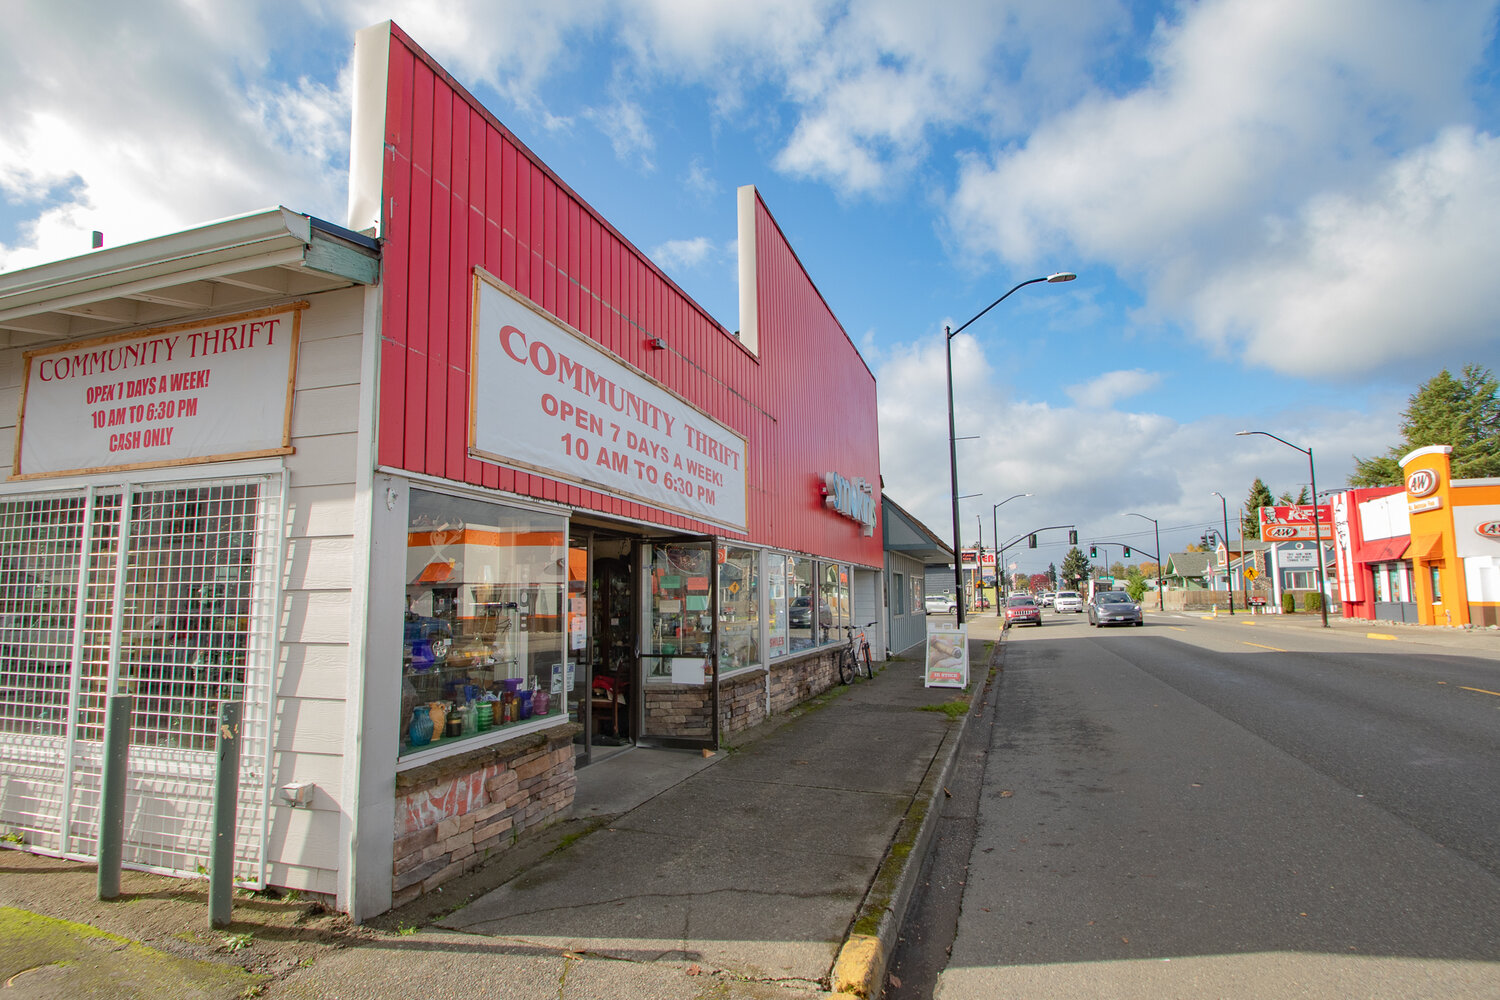 Now located at 608 W. Main St. in Centralia, Community Thrift was once located inside the Yard Birds shopping mall in Chehalis before it, along with the other businesses inside, were forced to move late last year.